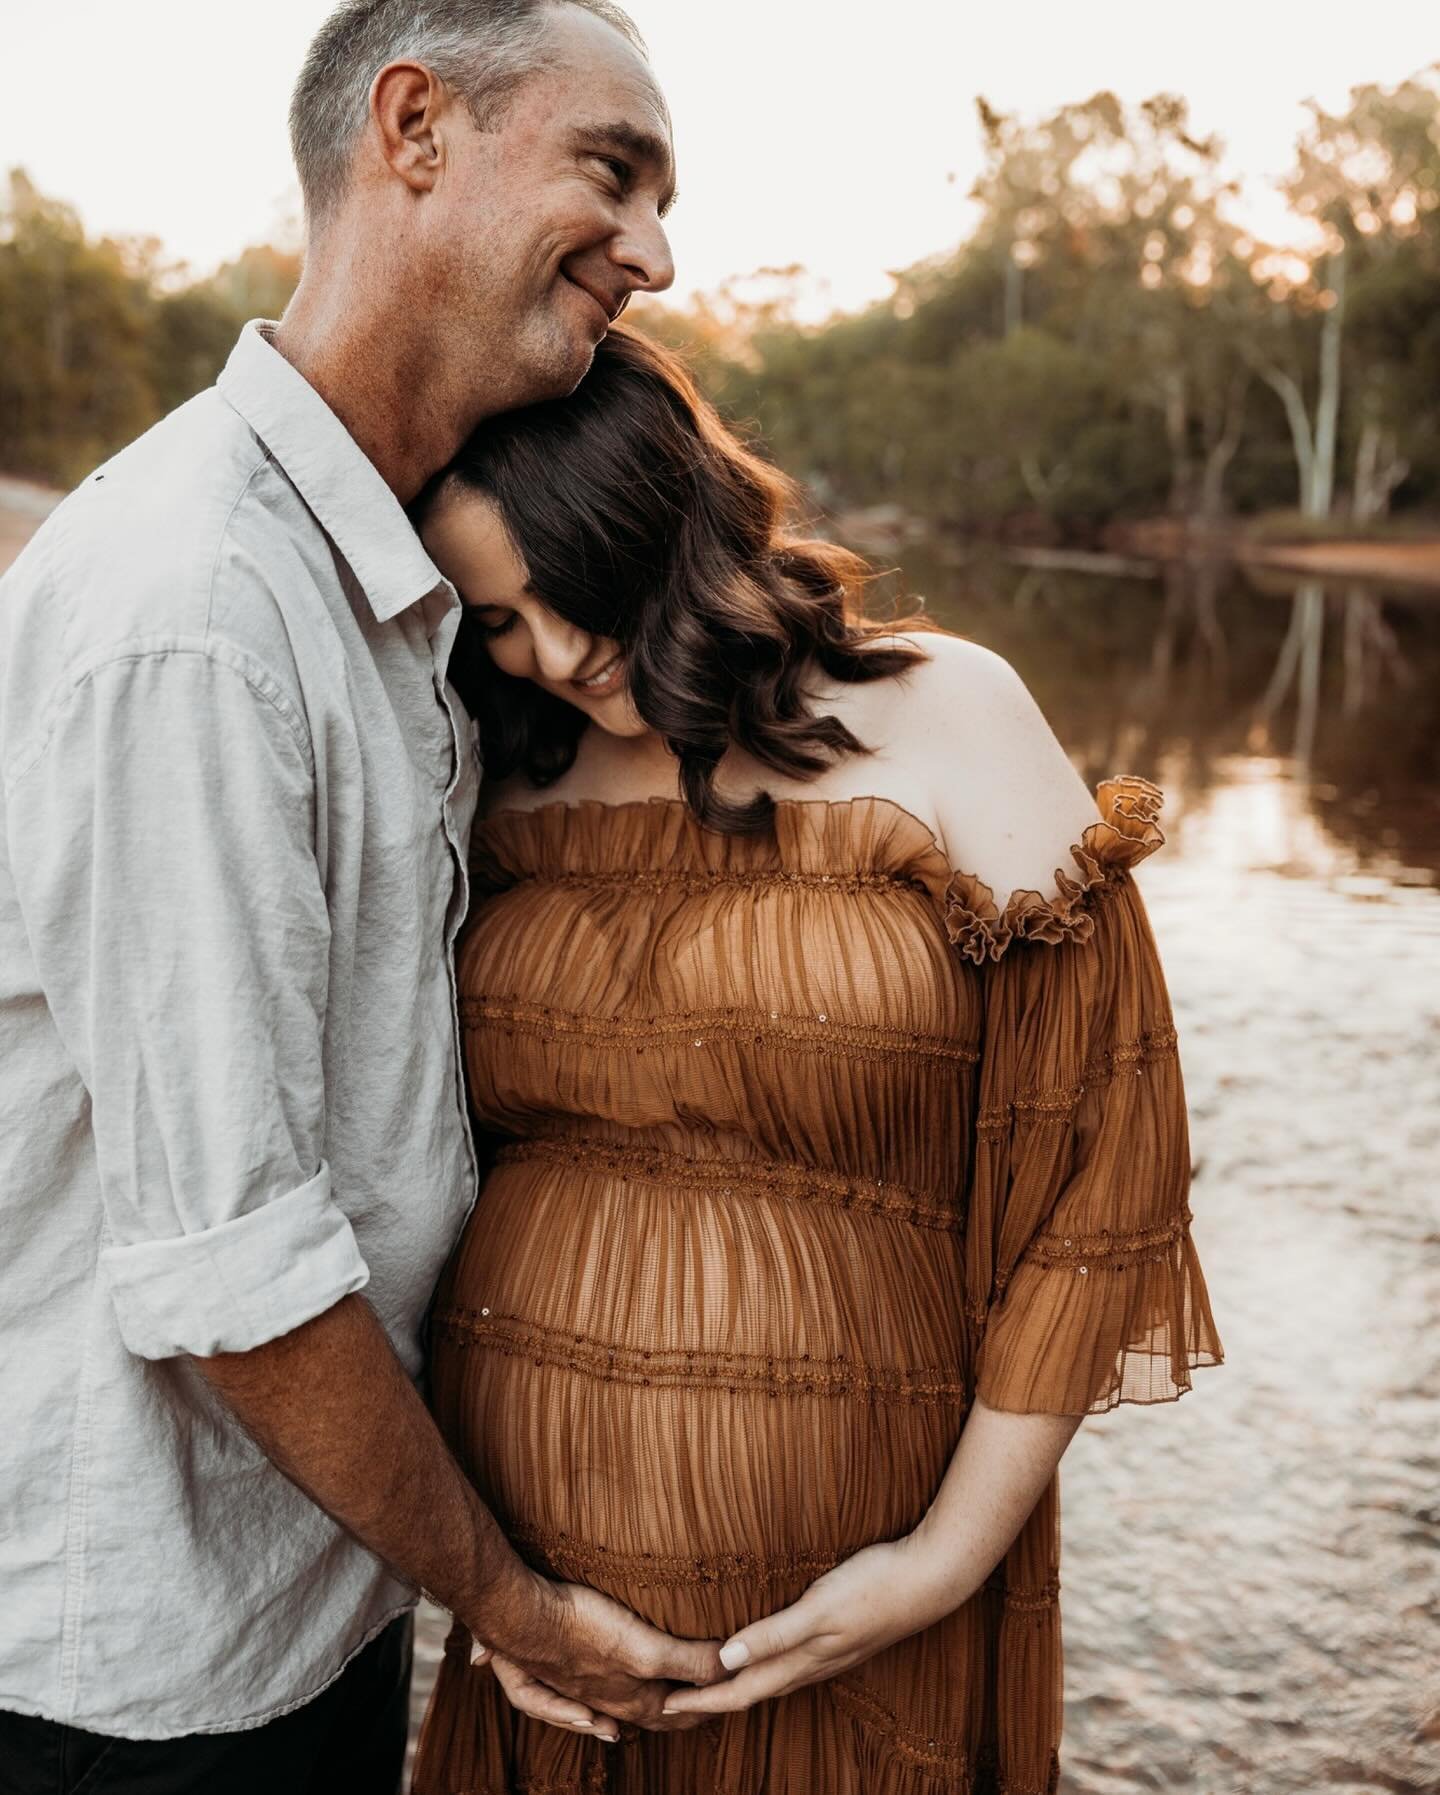 Entering the next chapter of their love story / just waiting on you little one ✨

And how blessed you are already to have these two to call your mummy and daddy 🫶🏼

NOW BOOKING 2024 📸www.aleyshiamcgrigorphotography.com.au

&bull;

&bull;

&bull;

